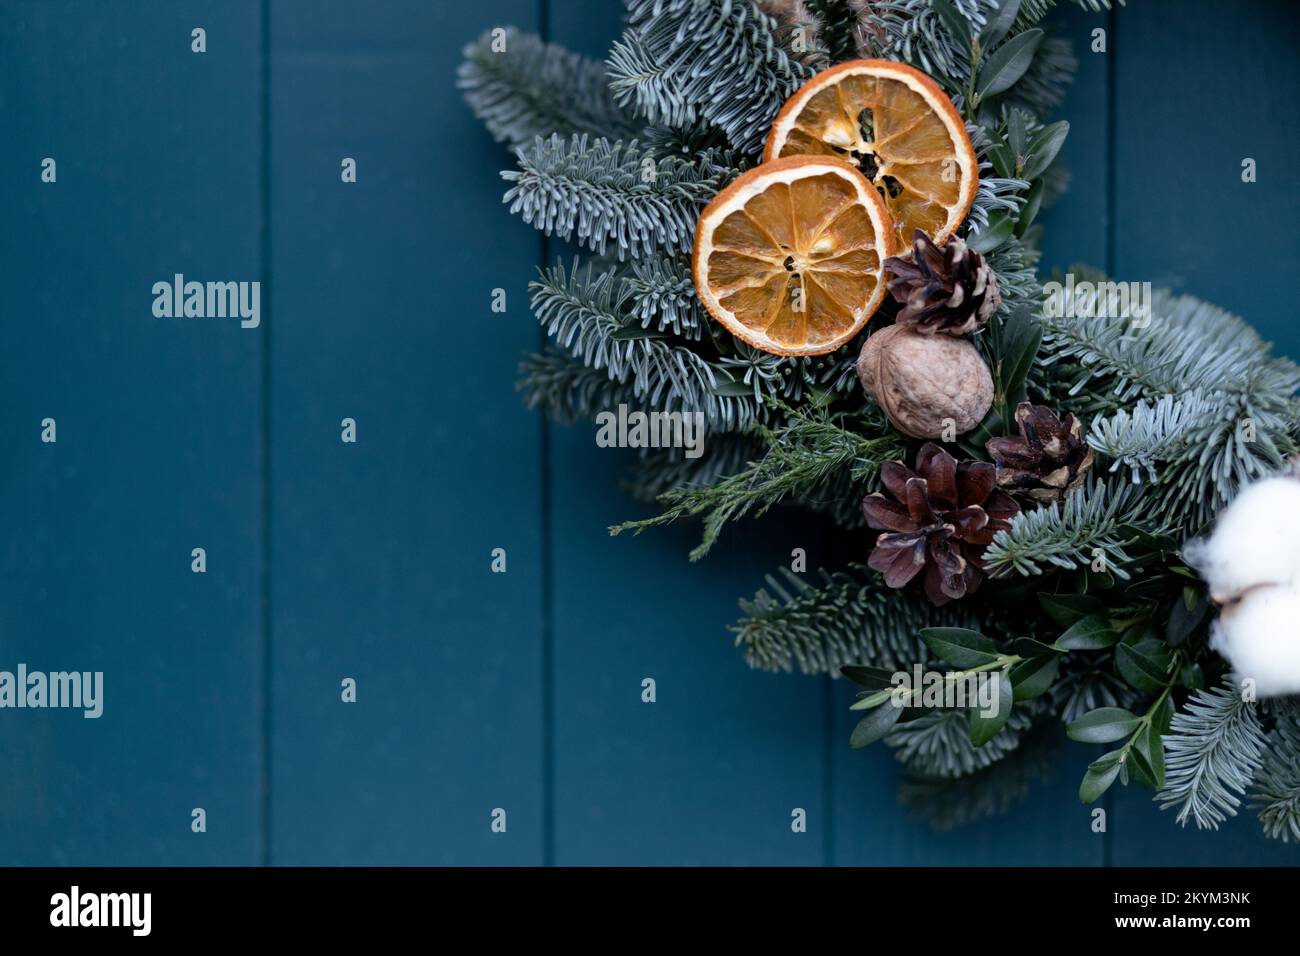 Part of a Christmas wreath consisting of a Christmas tree decorated with pine cones, dried orange on the background of a wooden blue door with space Stock Photo